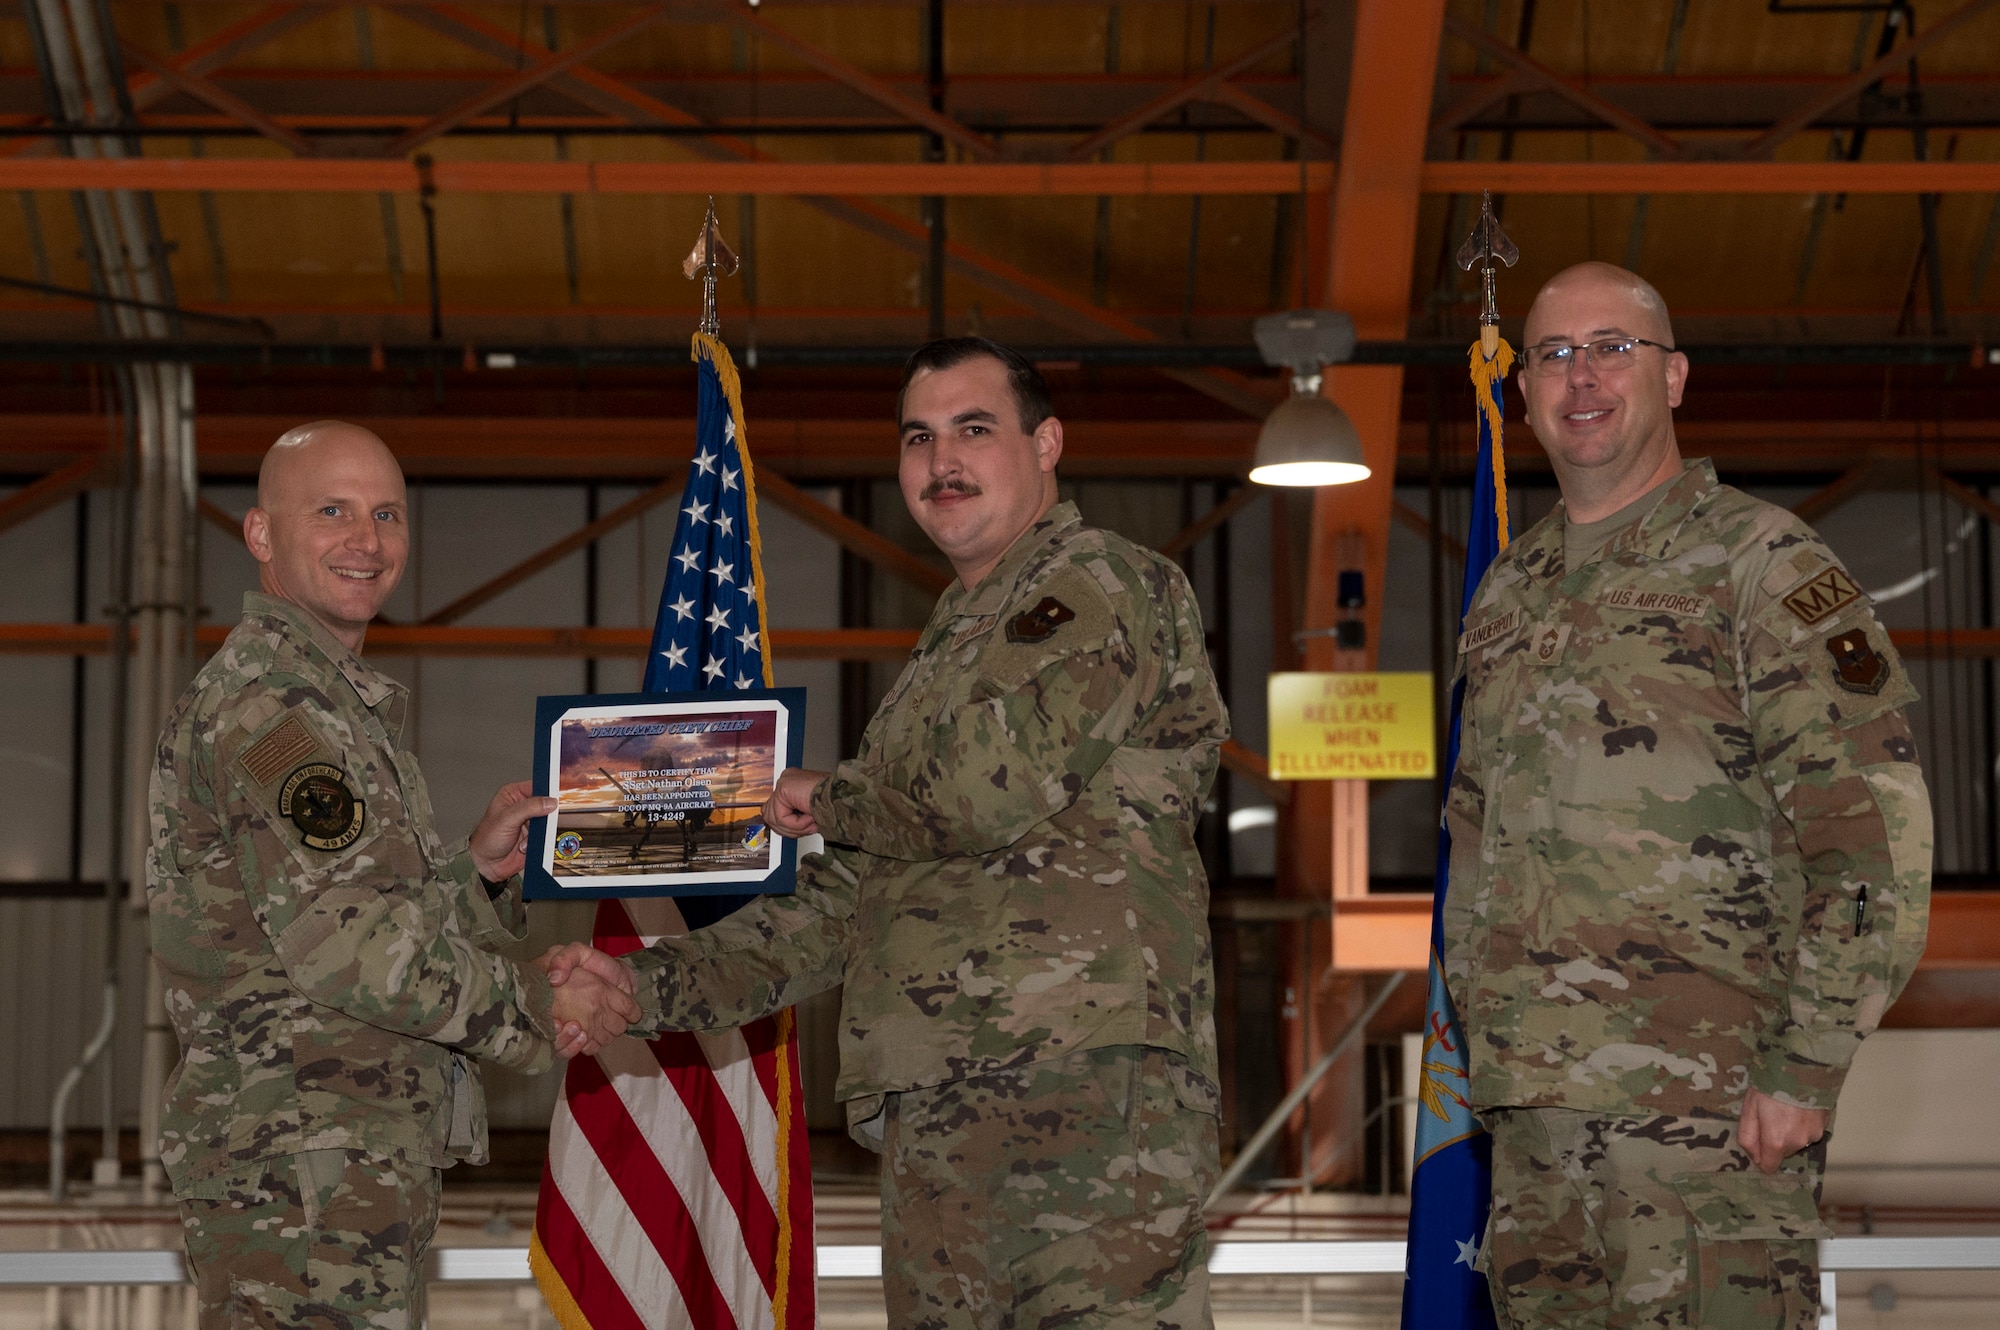 U.S. Air Force Staff Sgt. Nathan Olsen,
49th Aircraft Maintenance Squadron crew chief, center, receives a certificate from U.S. Air Force Maj. Donald Bolda, 49th Aircraft Maintenance Squadron commander, left, during the 2022 Dedicated Crew Chief Appointment Ceremony at Holloman Air Force Base, New Mexico, Nov. 18, 2022. To receive the title of DCC, a crew chief must demonstrate a history of superior performance in their career, comply with all safety practices and complete all required training. (U.S. Air Force photo by Airman 1st Class Isaiah Pedrazzini)